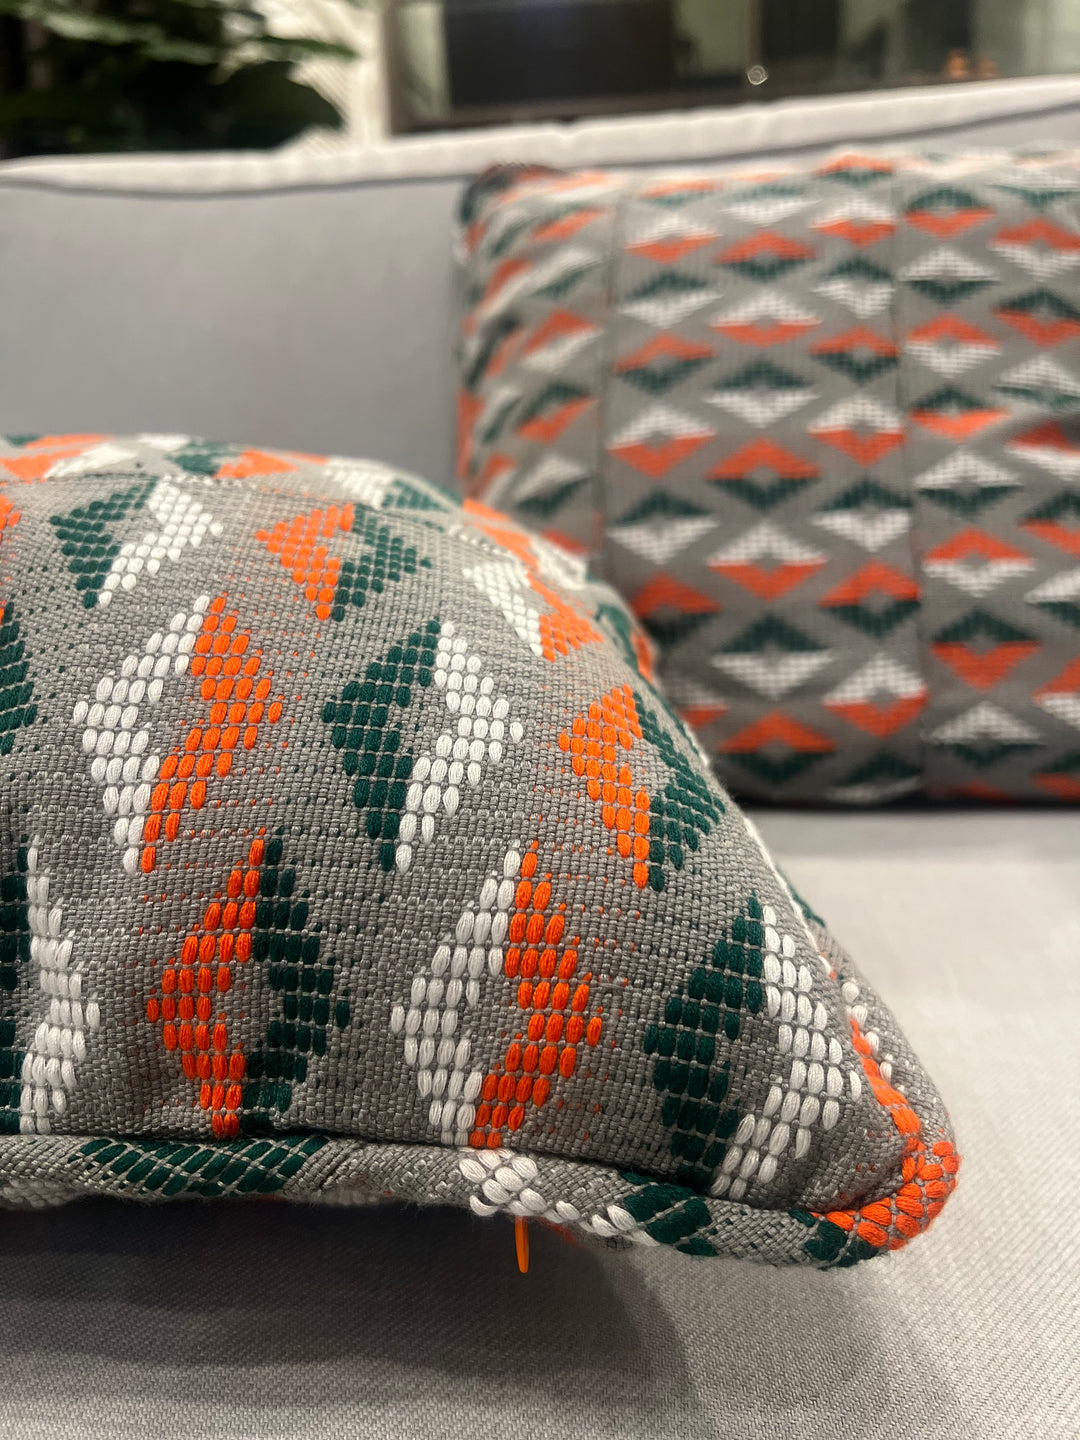 Luxurious Kente throw pillow with authentic Kente textiles, perfect for African-inspired home decor and traditional Kente cloth blankets